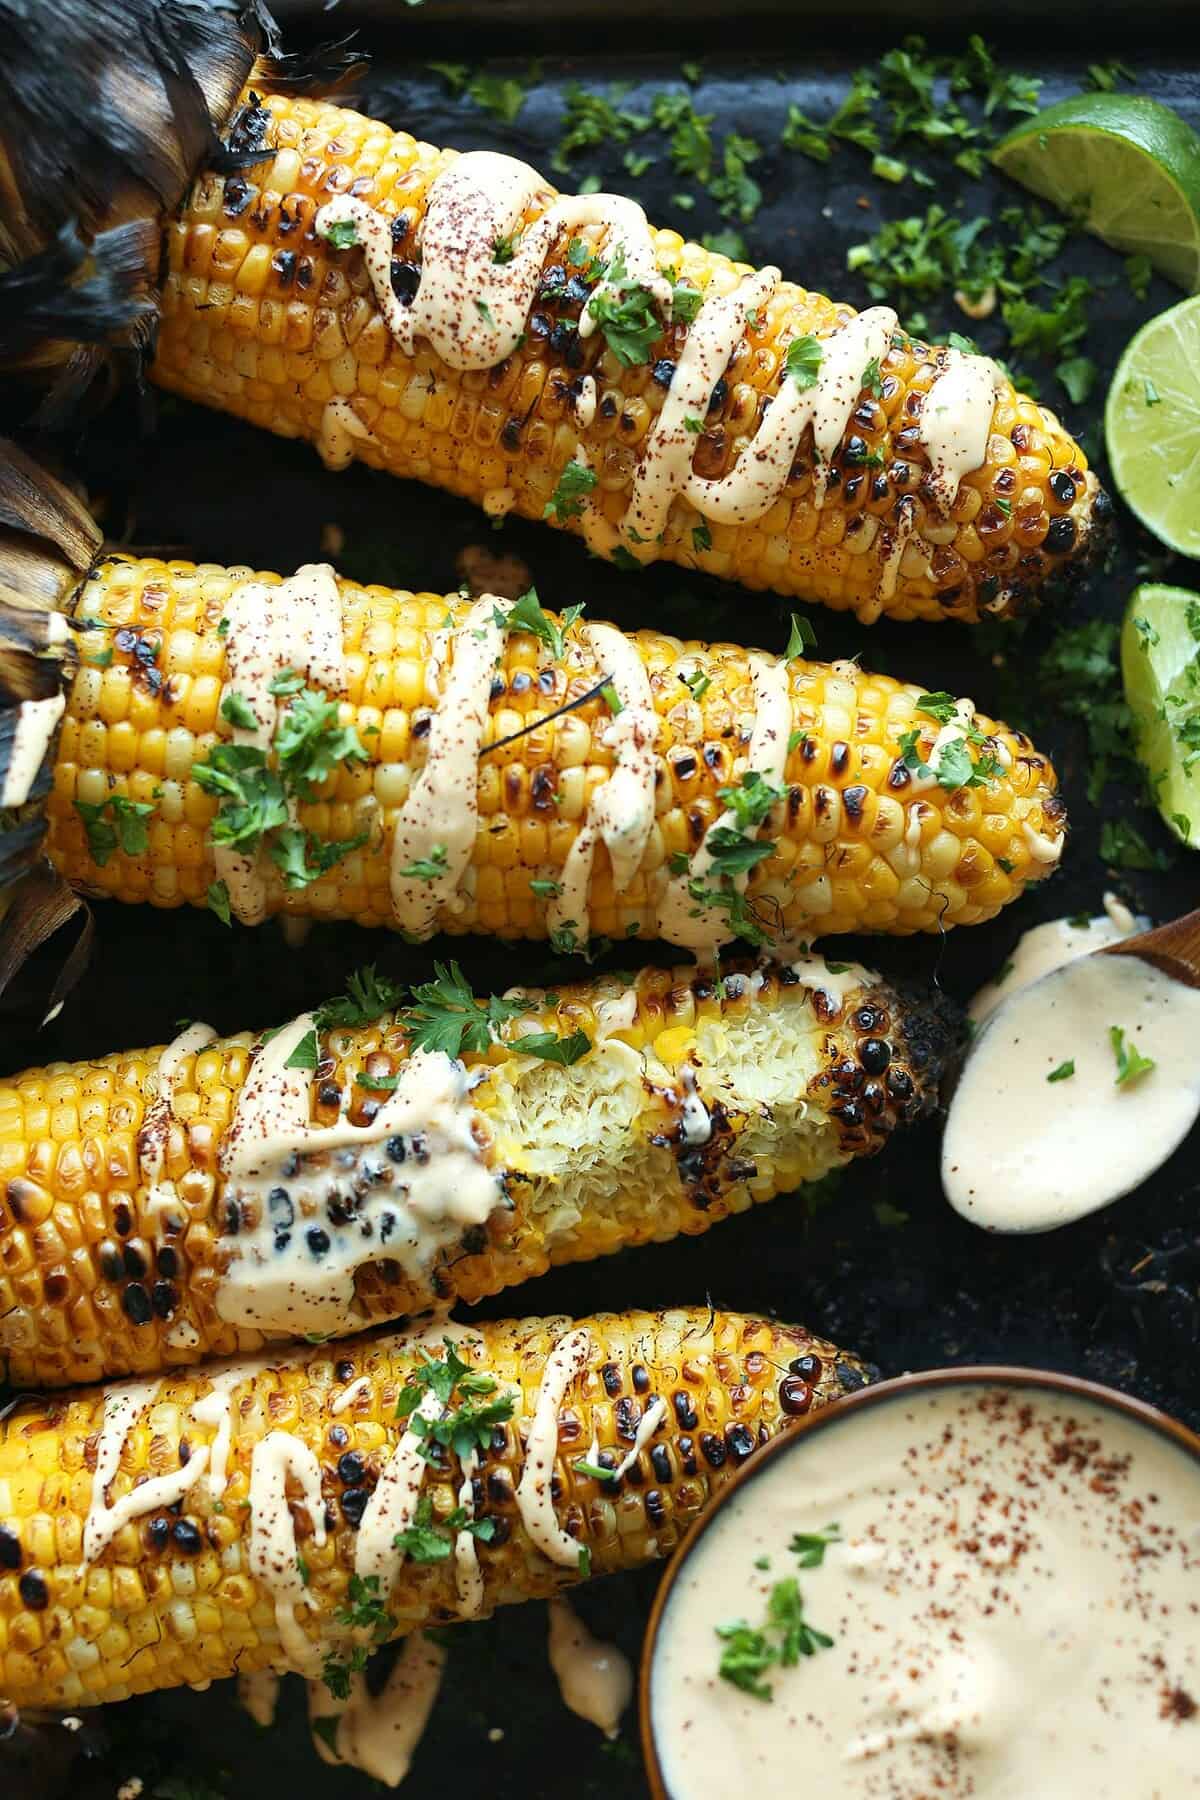  Fire up the grill and prepare for a flavor explosion!